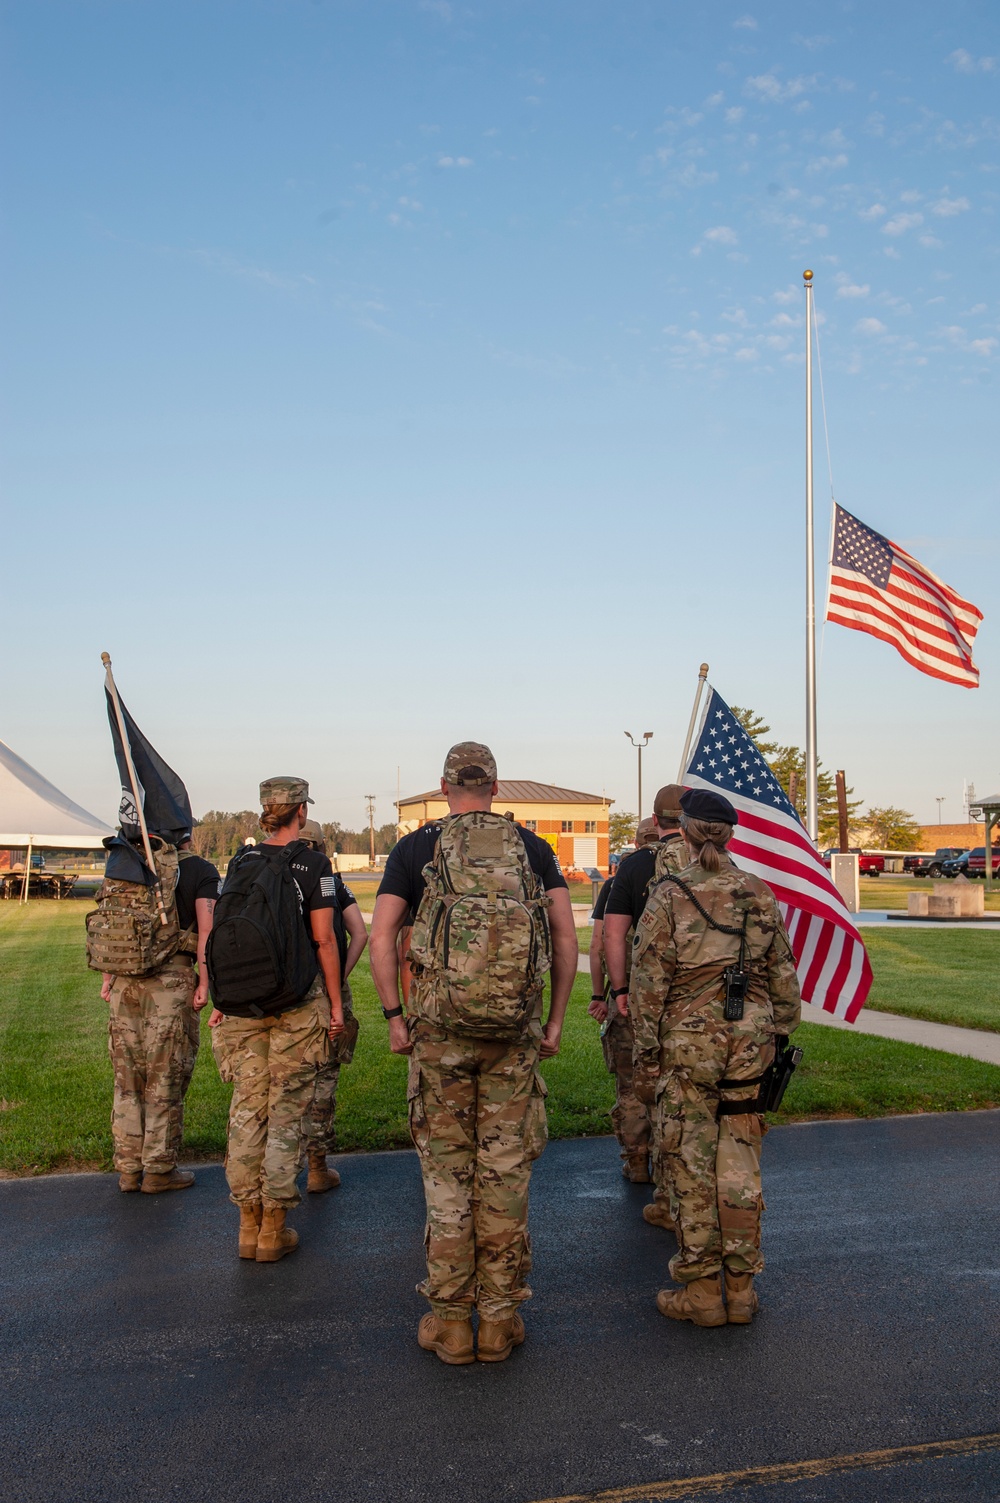 180th Fighter Wing Remembers 9/11 with Ruck March